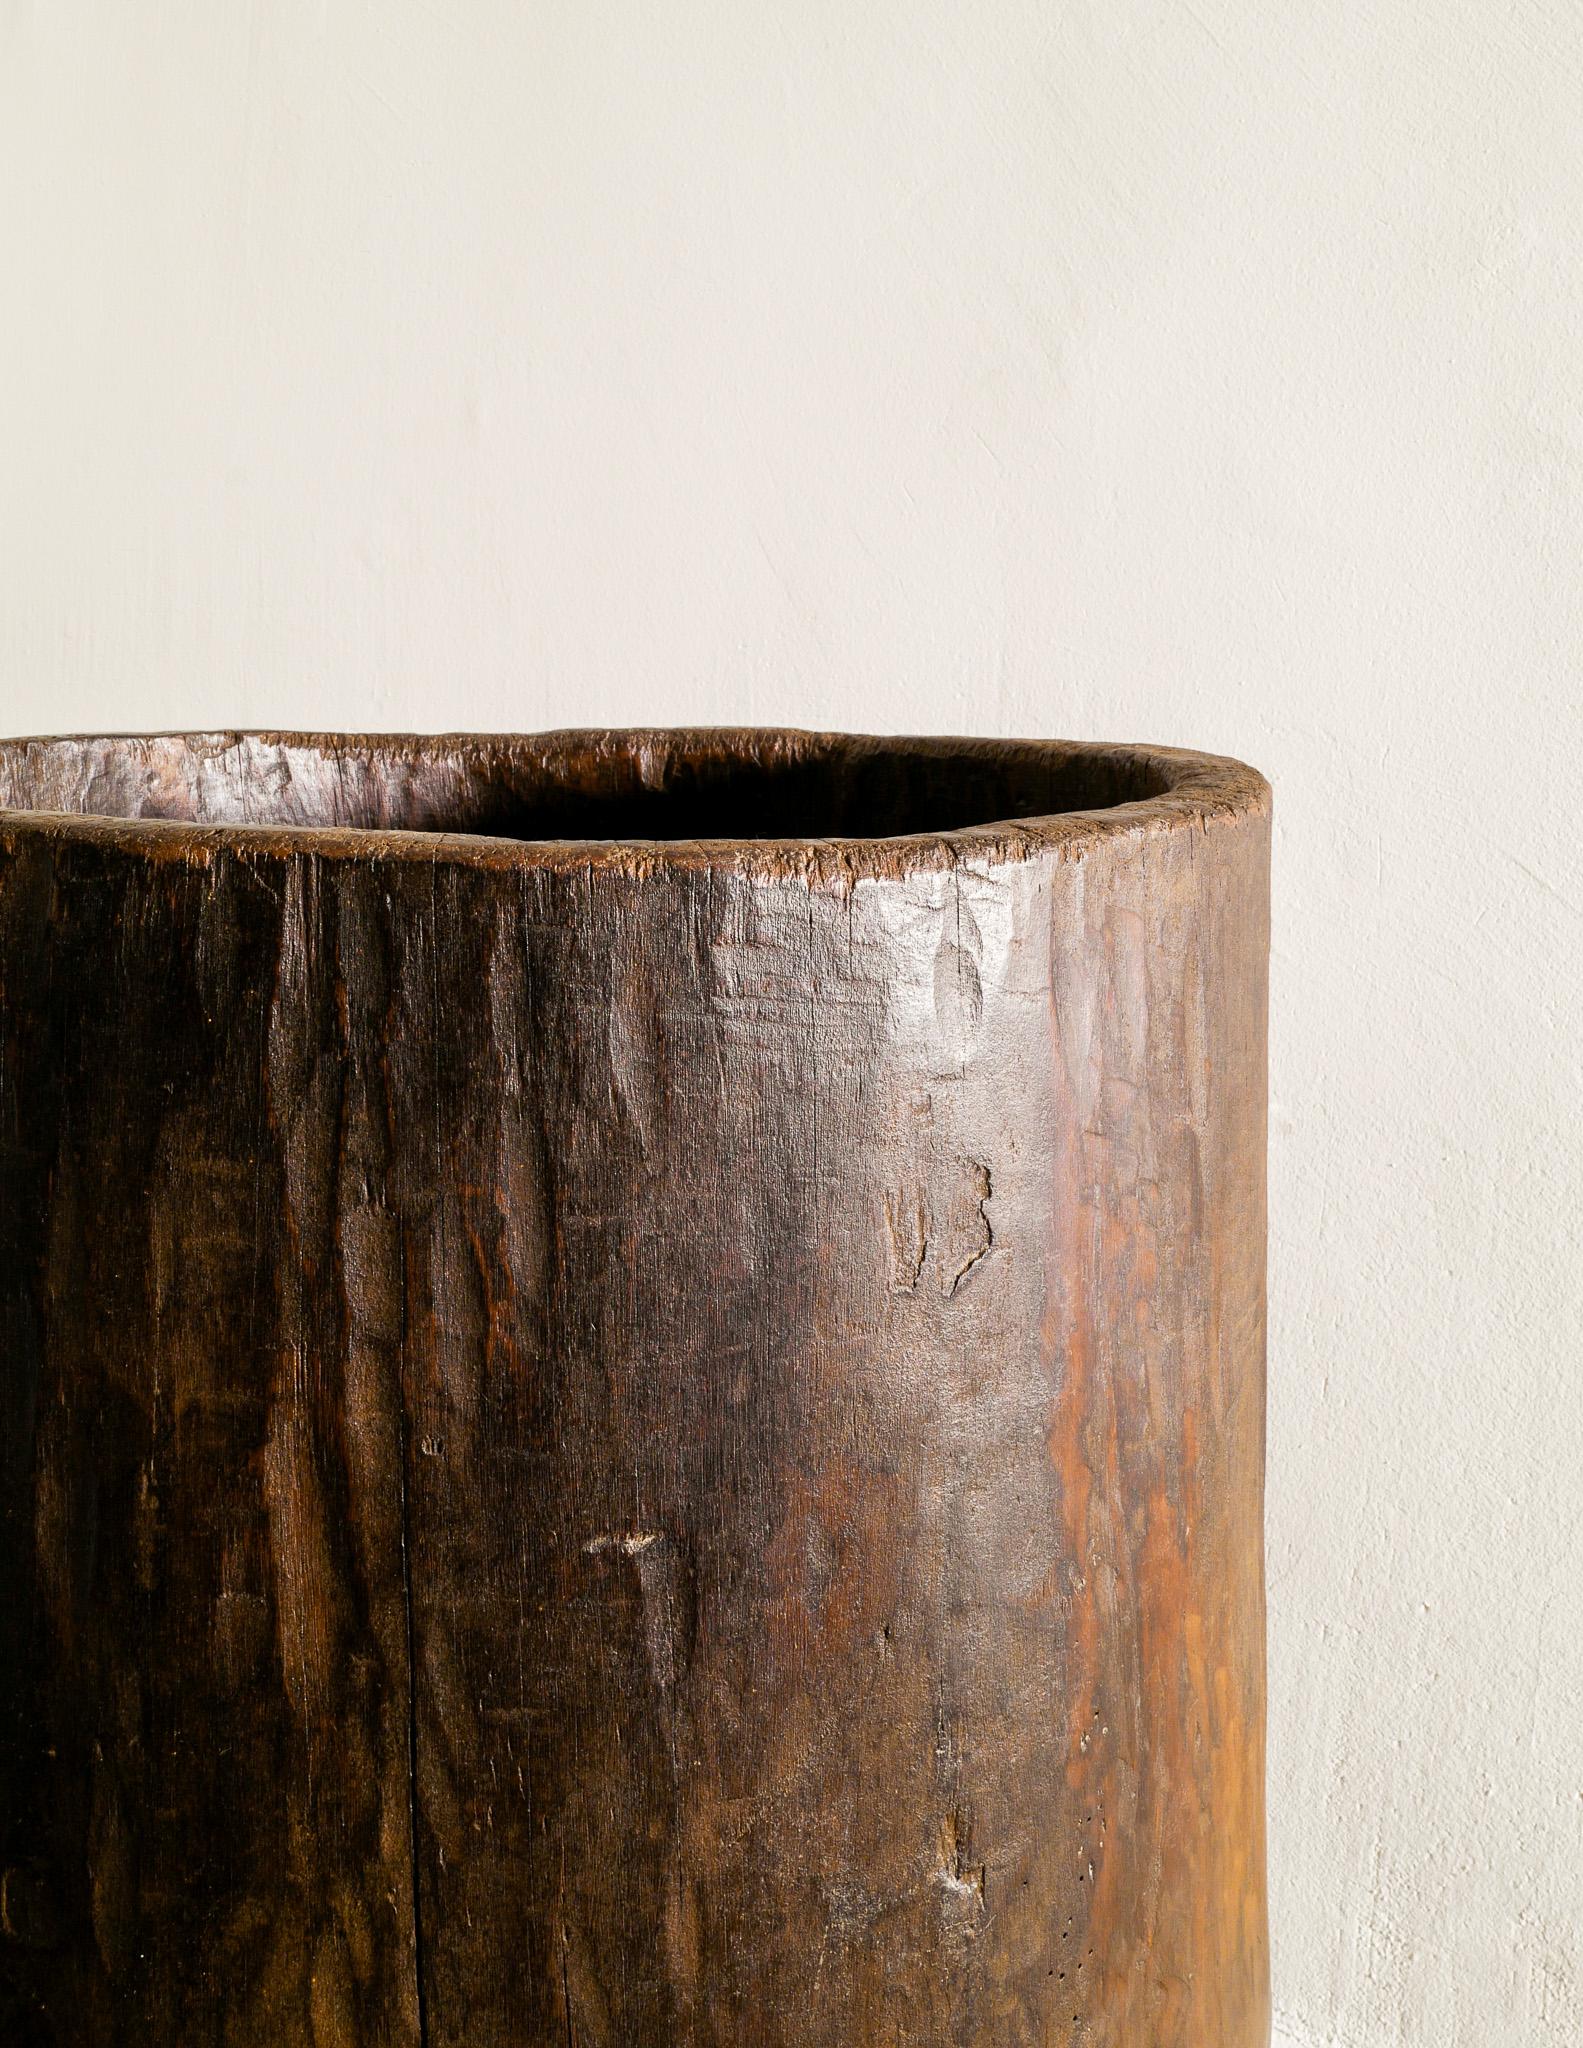 Late 20th Century Mid Century Naga Wooden Planter in Teak and Wabi Sabi Style Produced in India For Sale